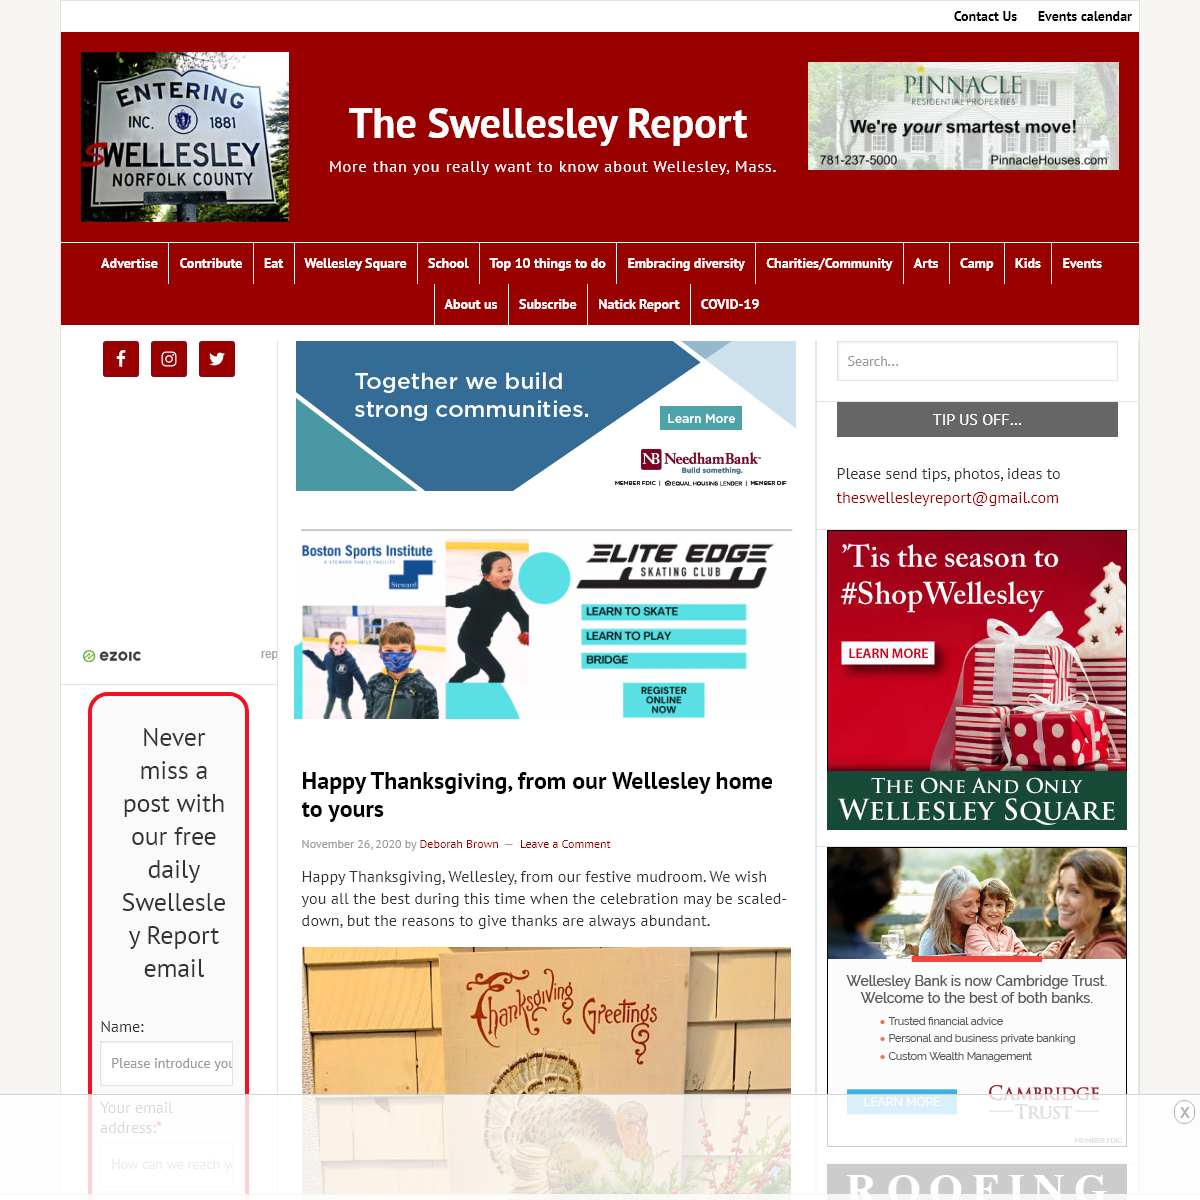 A complete backup of theswellesleyreport.com